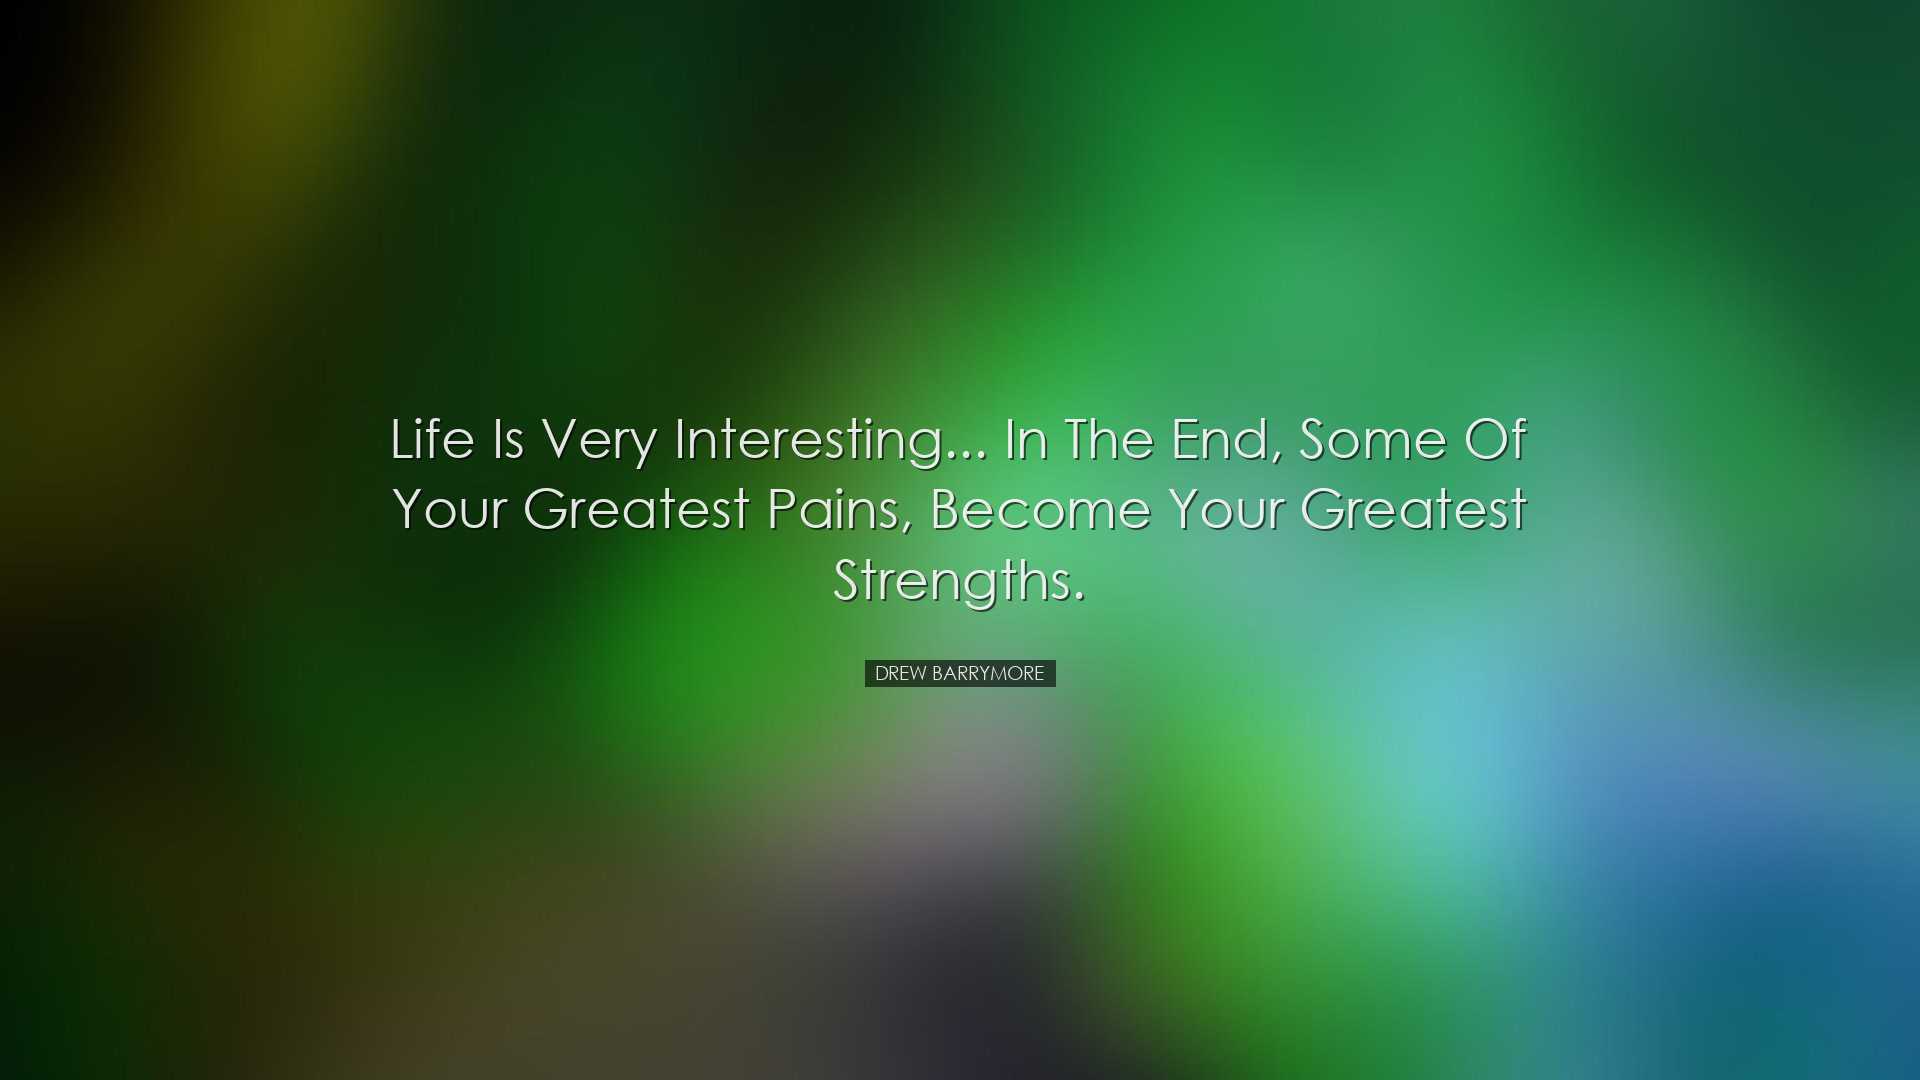 Life is very interesting... in the end, some of your greatest pain